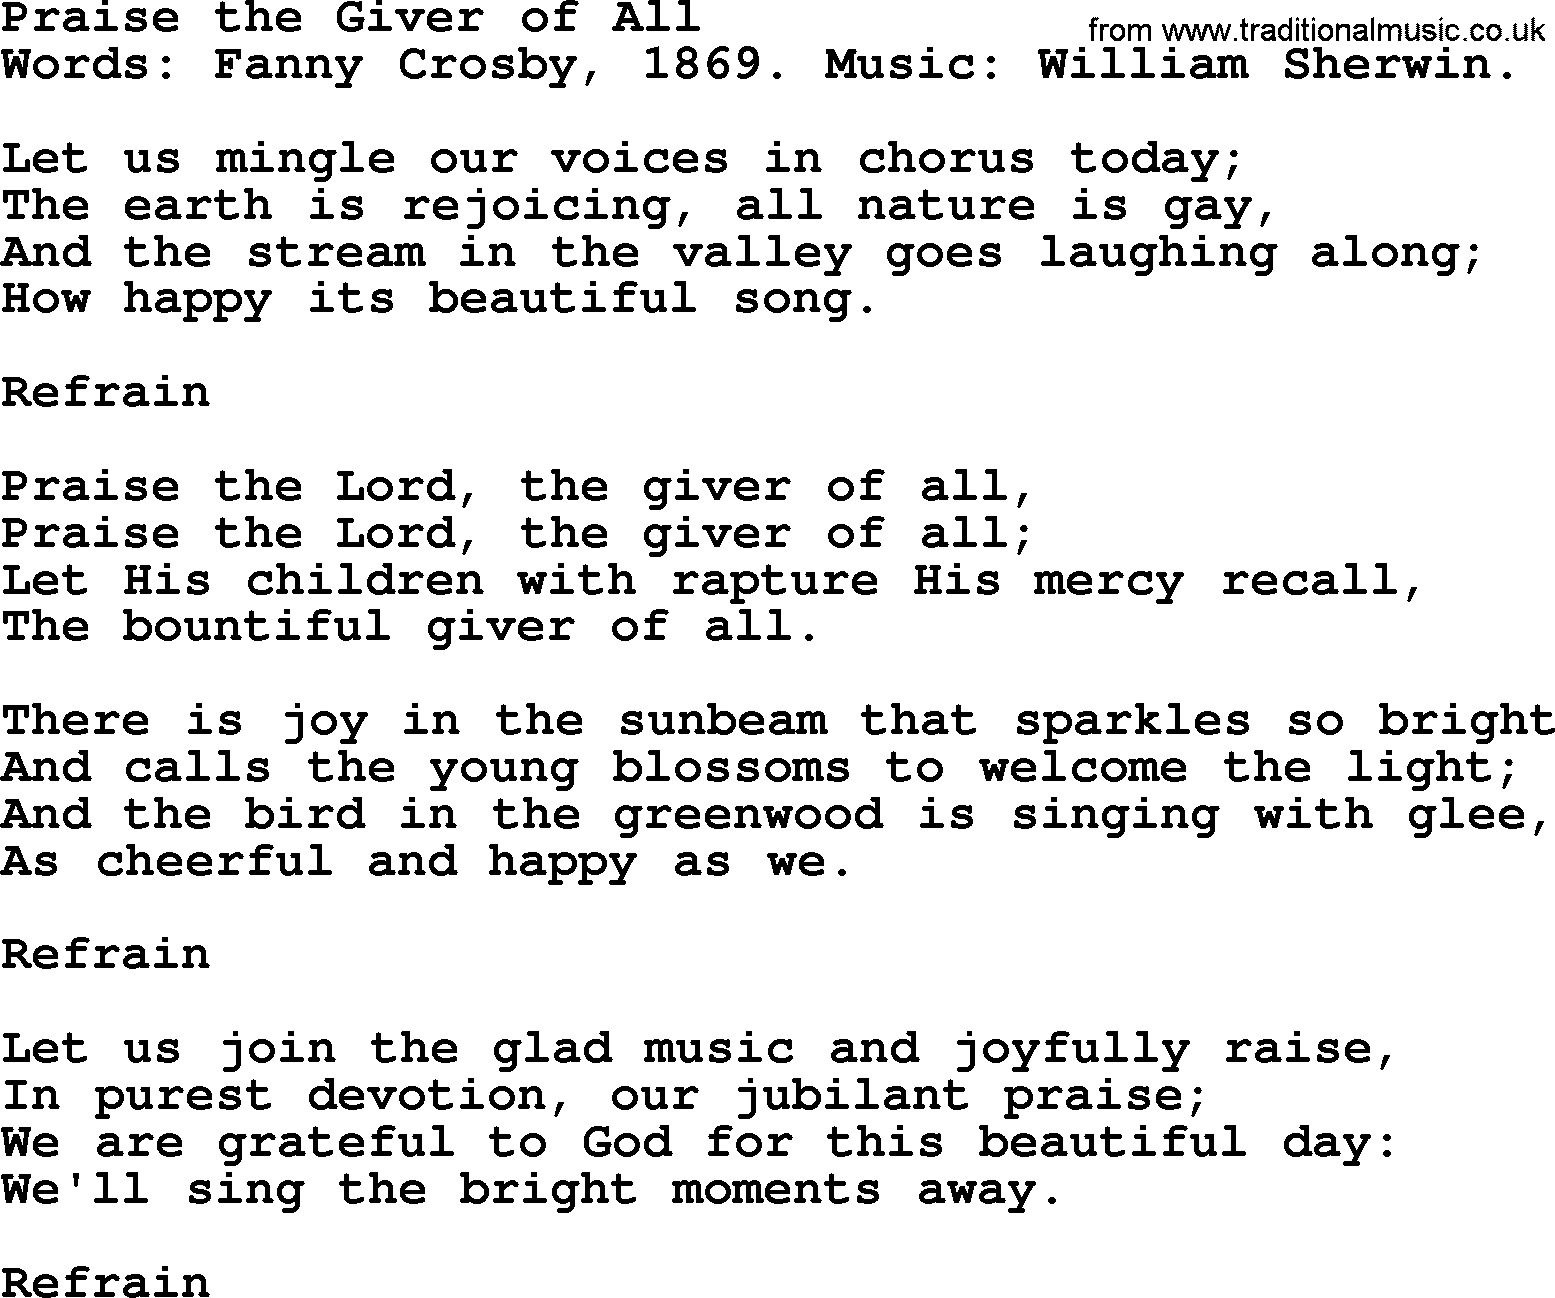 Fanny Crosby song: Praise The Giver Of All, lyrics